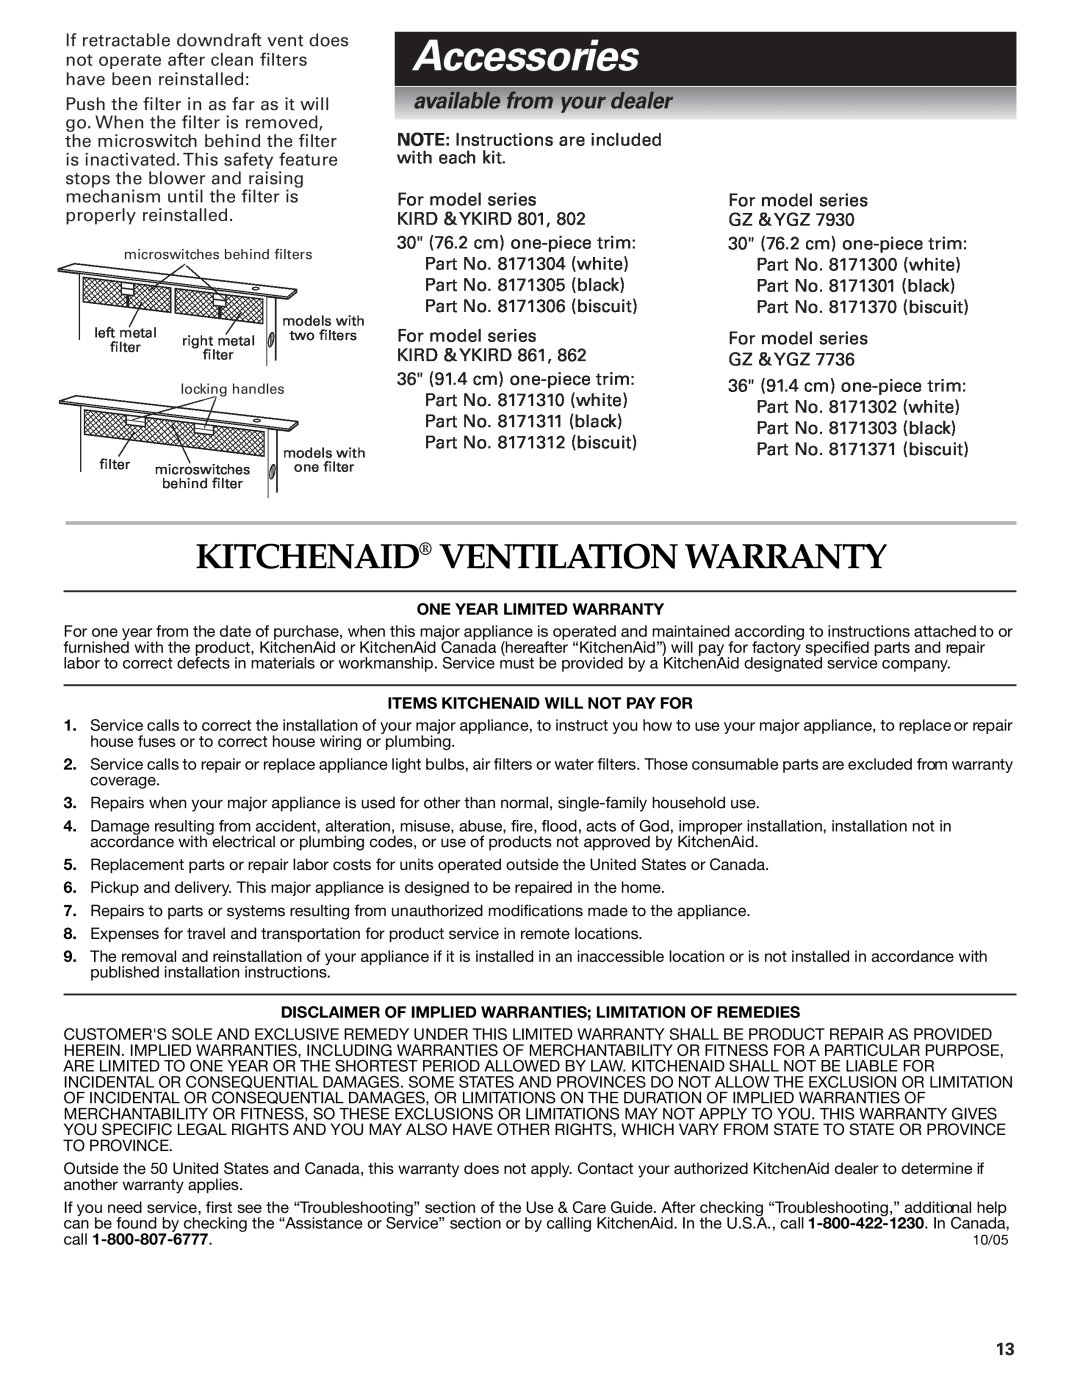 KitchenAid KPEU722M installation instructions Accessories, Kitchenaid Ventilation Warranty, available from your dealer 